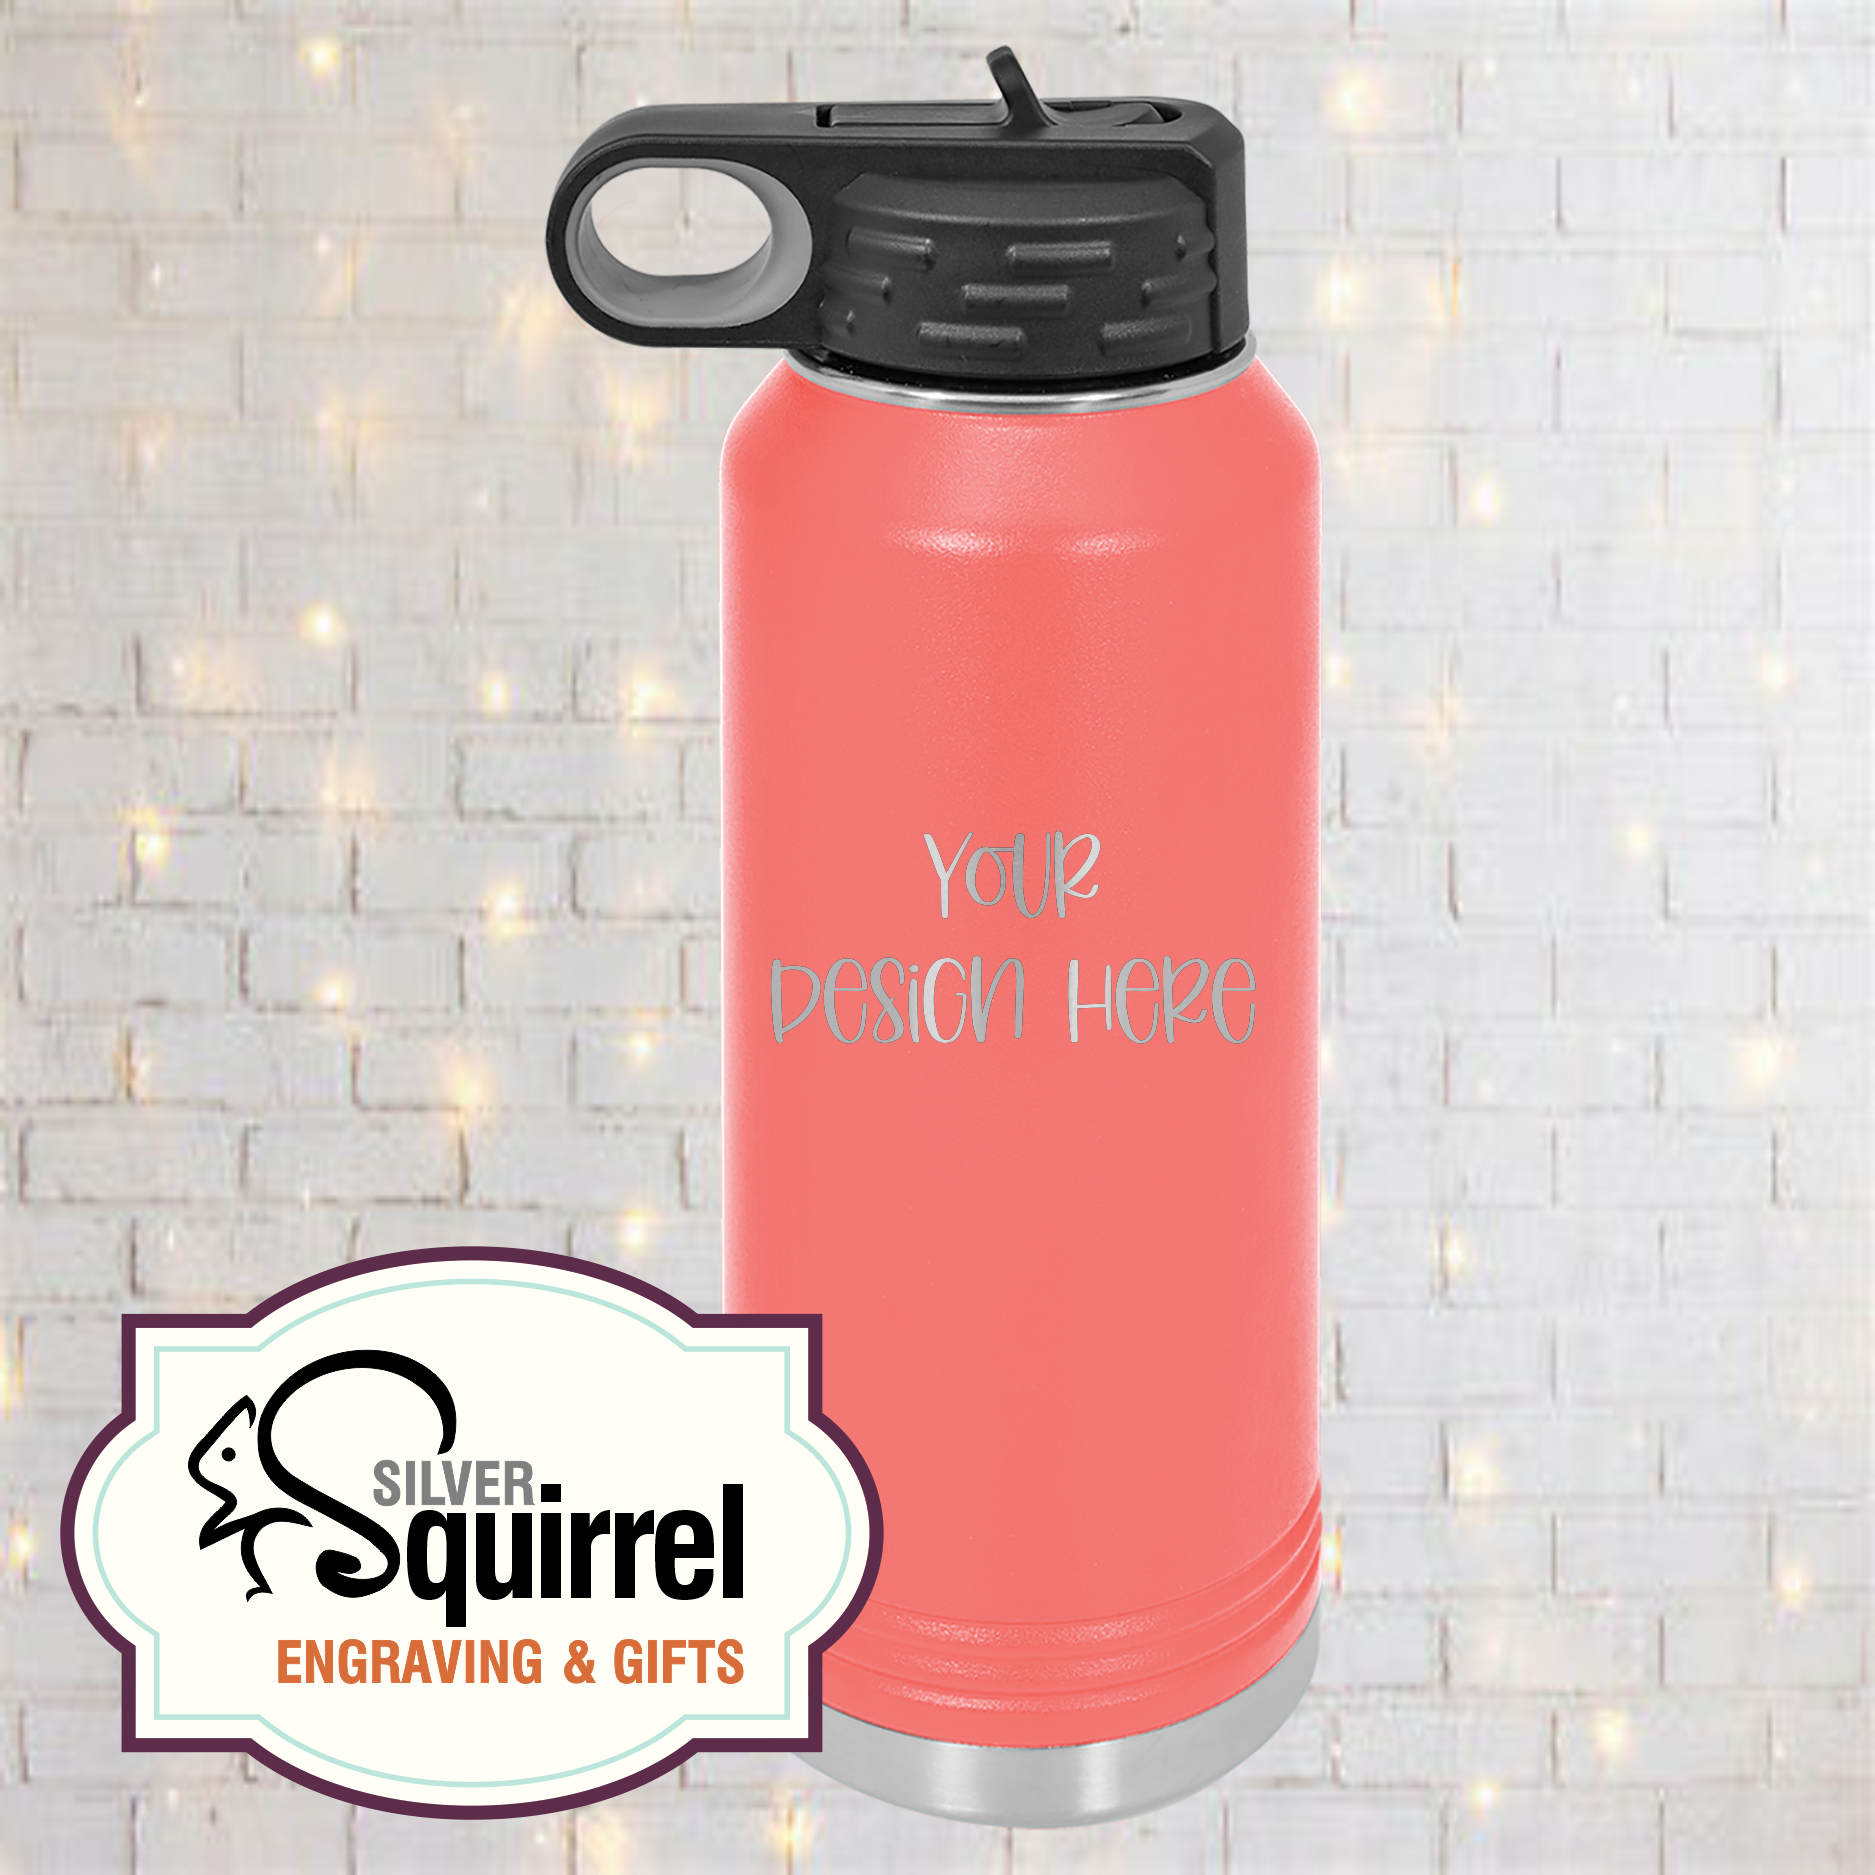 GenRight 32 oz. Insulated Laser Engraved Stainless Steel Water Bottle  (Choose Color)